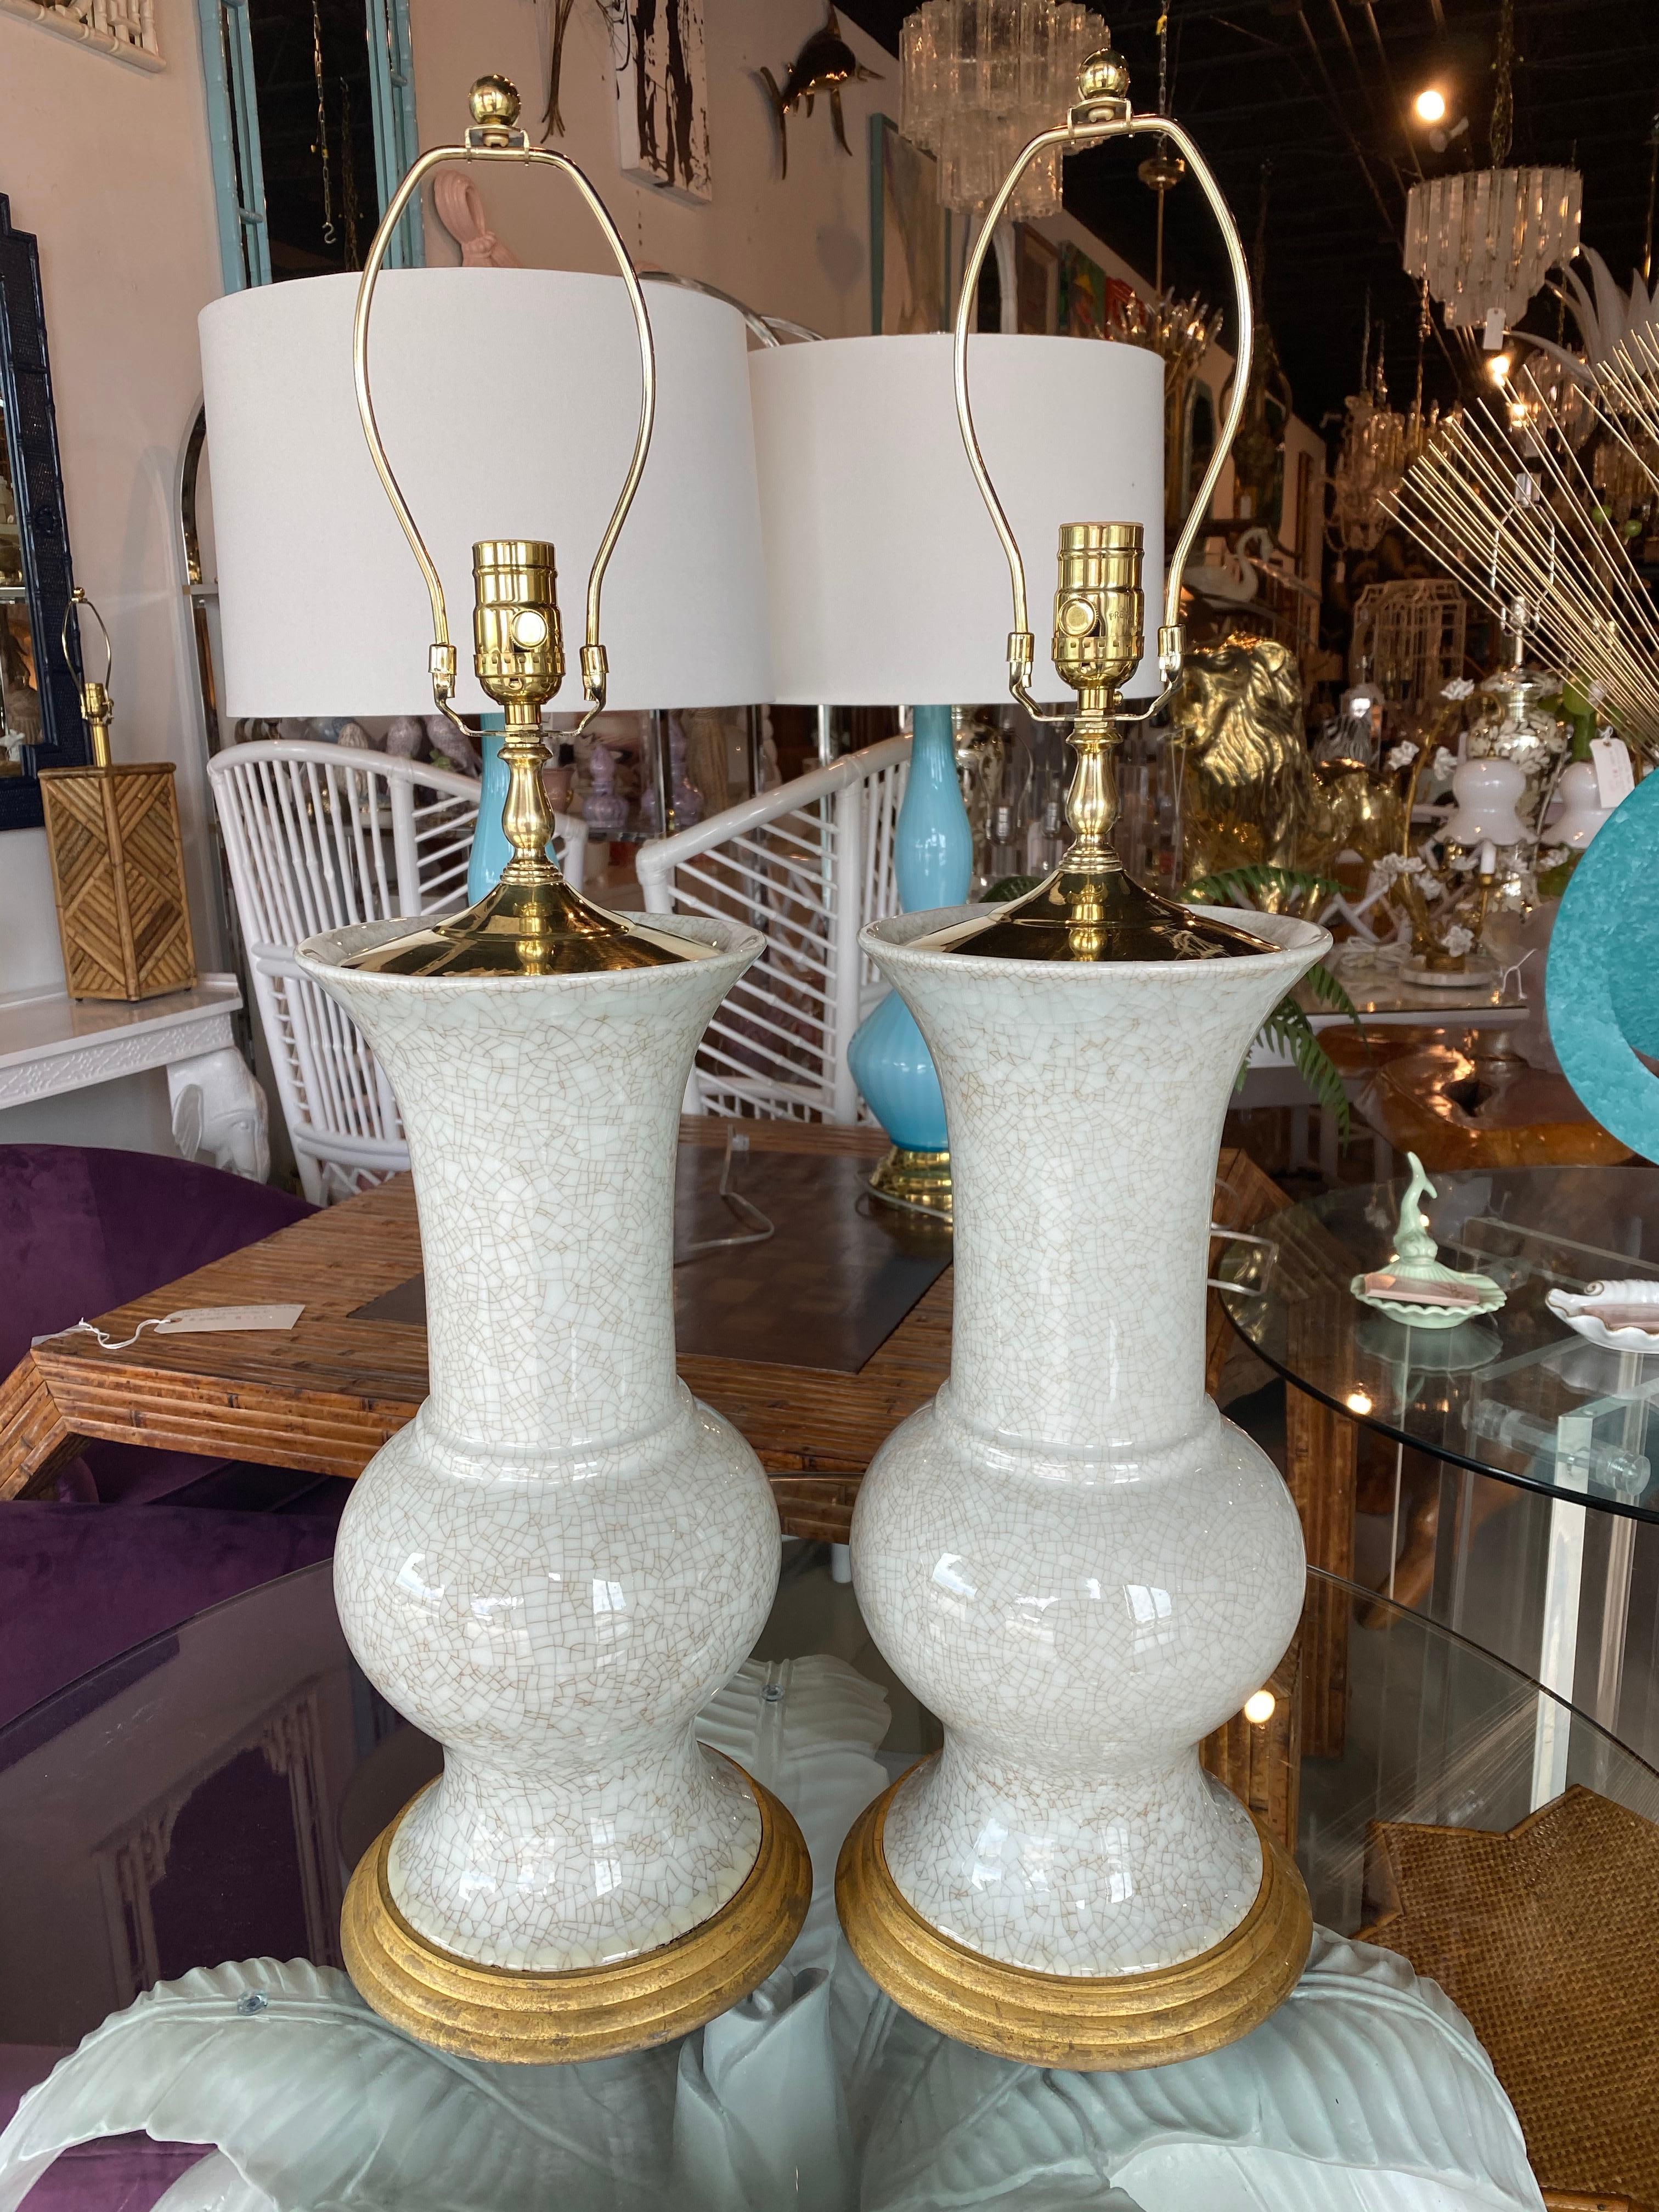 Lovely vintage pair of crackle glaze ceramic table lamps. These came out of the Breakers Palm Beach many years ago. They have been newly wired. All new brass hardware.
Measures: Height to socket 23.5
Height to finial 30.